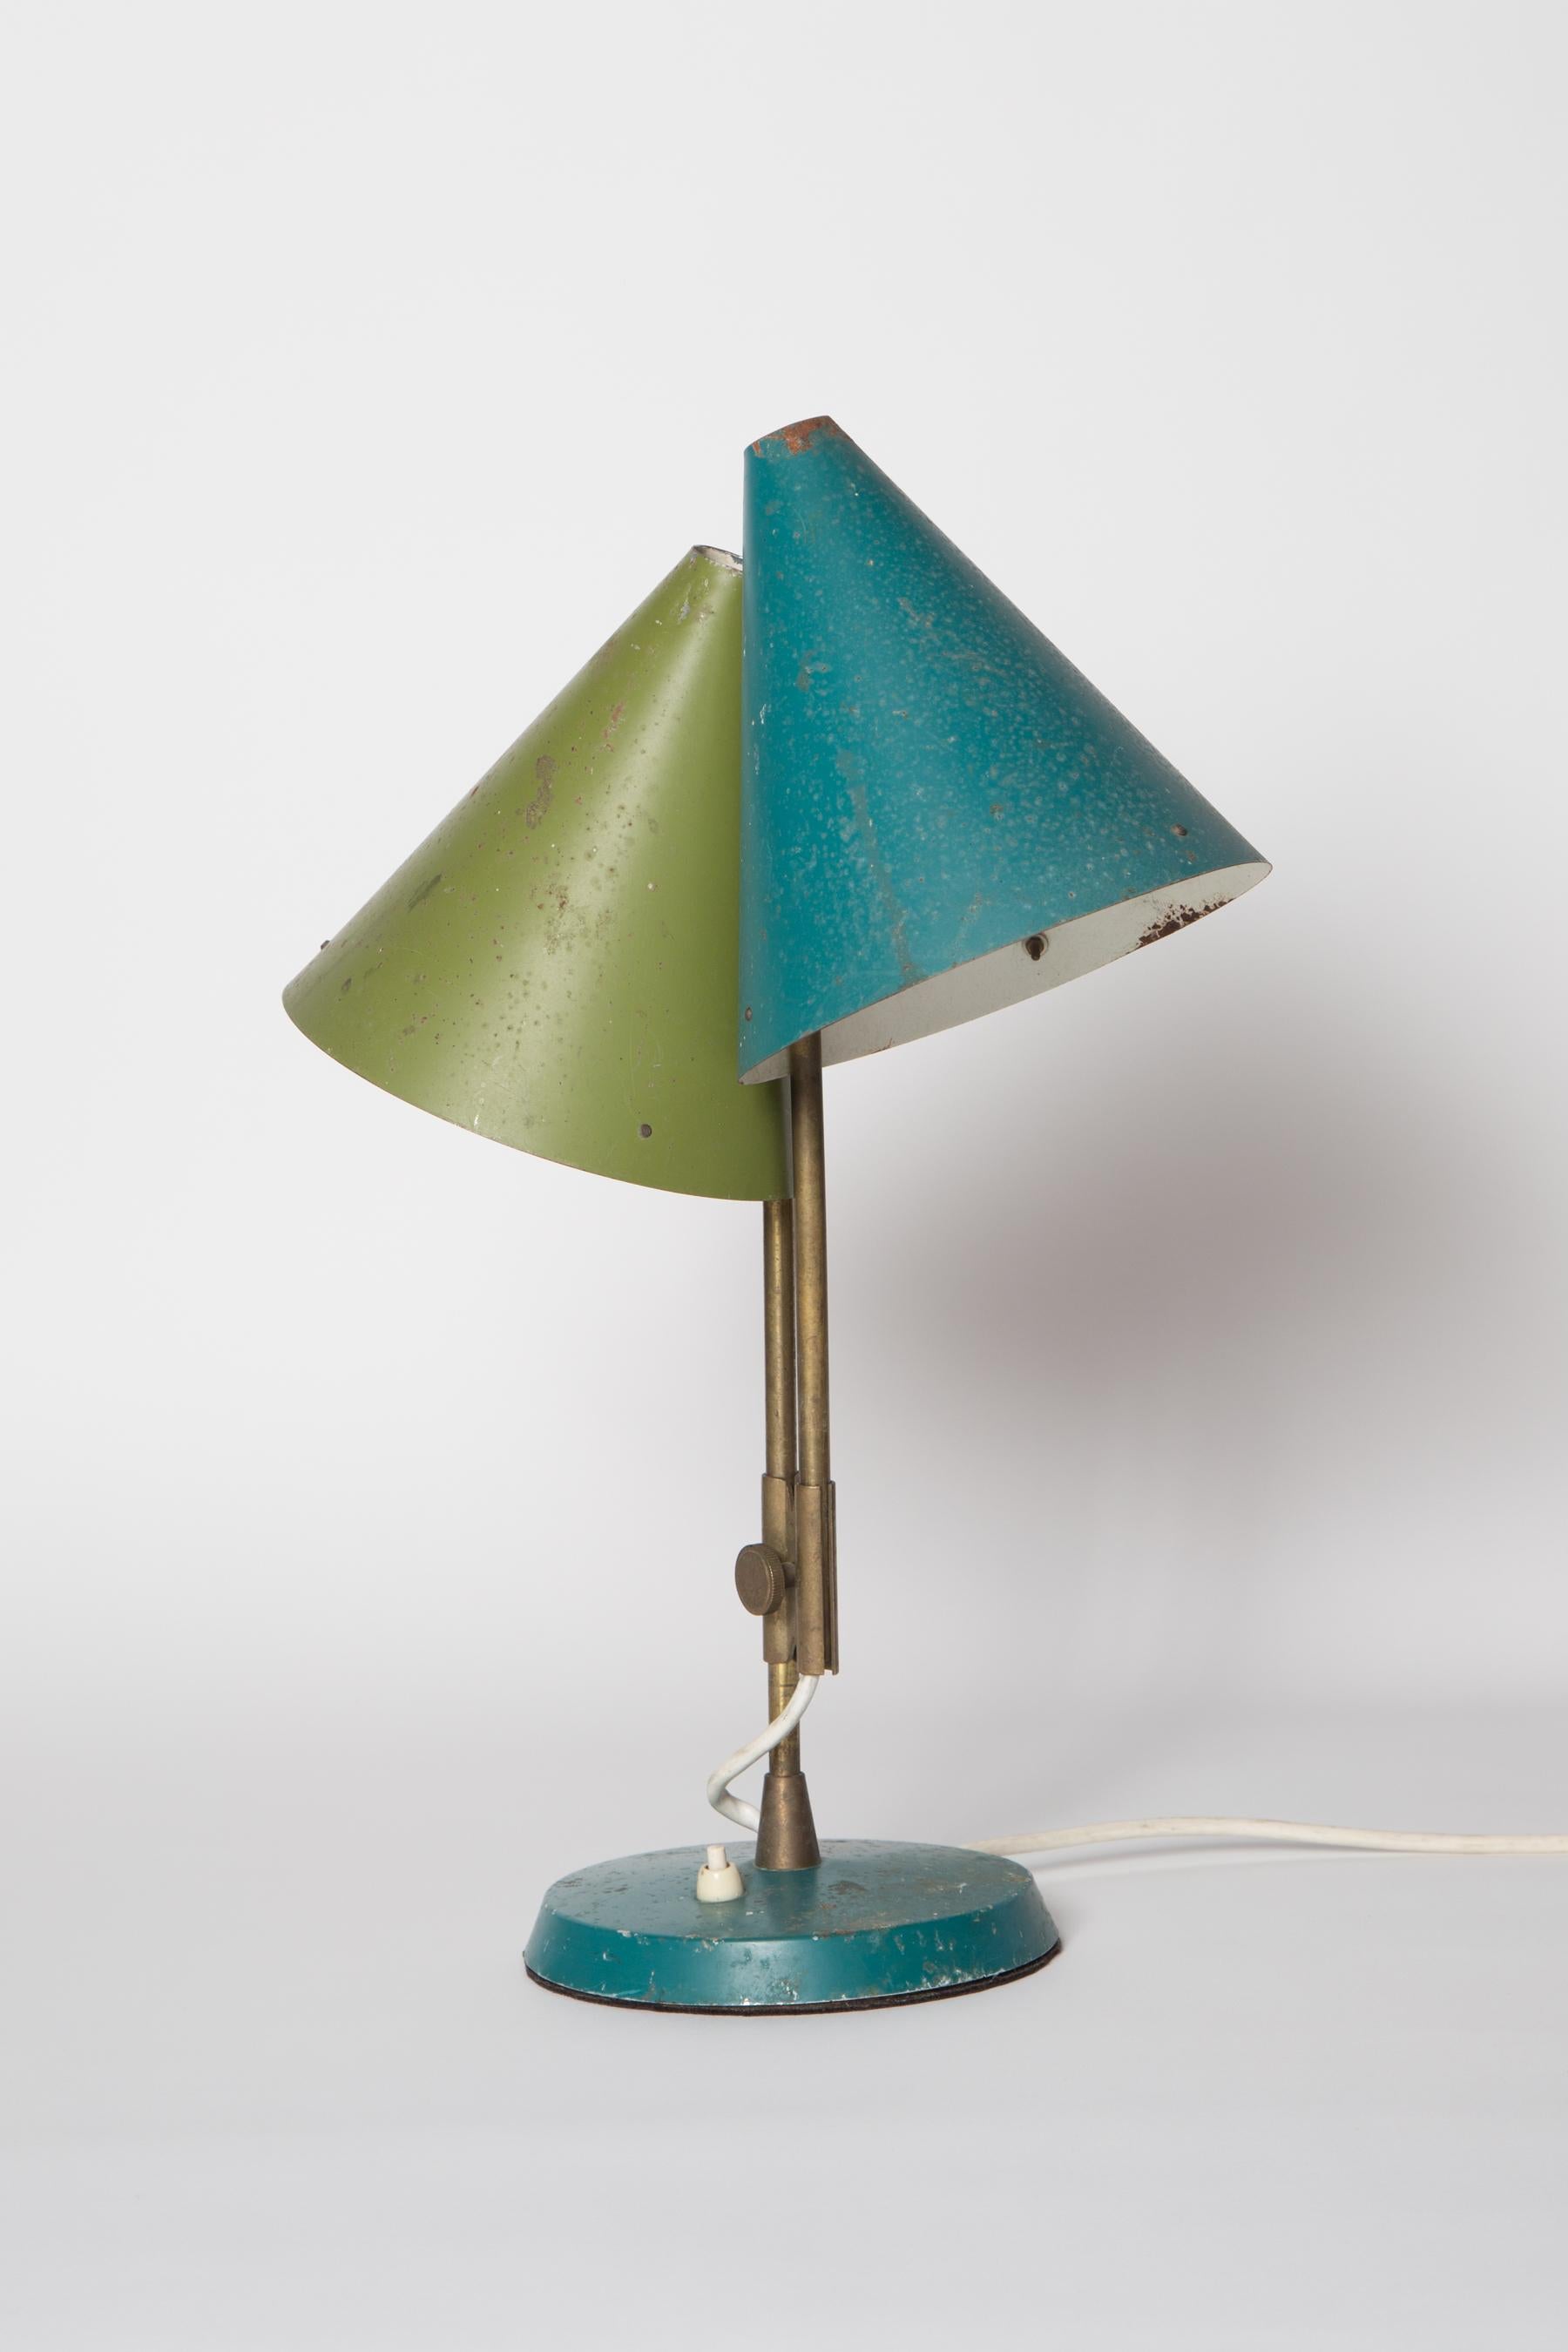 1959 Bent Karlby 'Mosaik' Adjustable Brass & Lacquered Metal Table Lamp for Lyfa 11